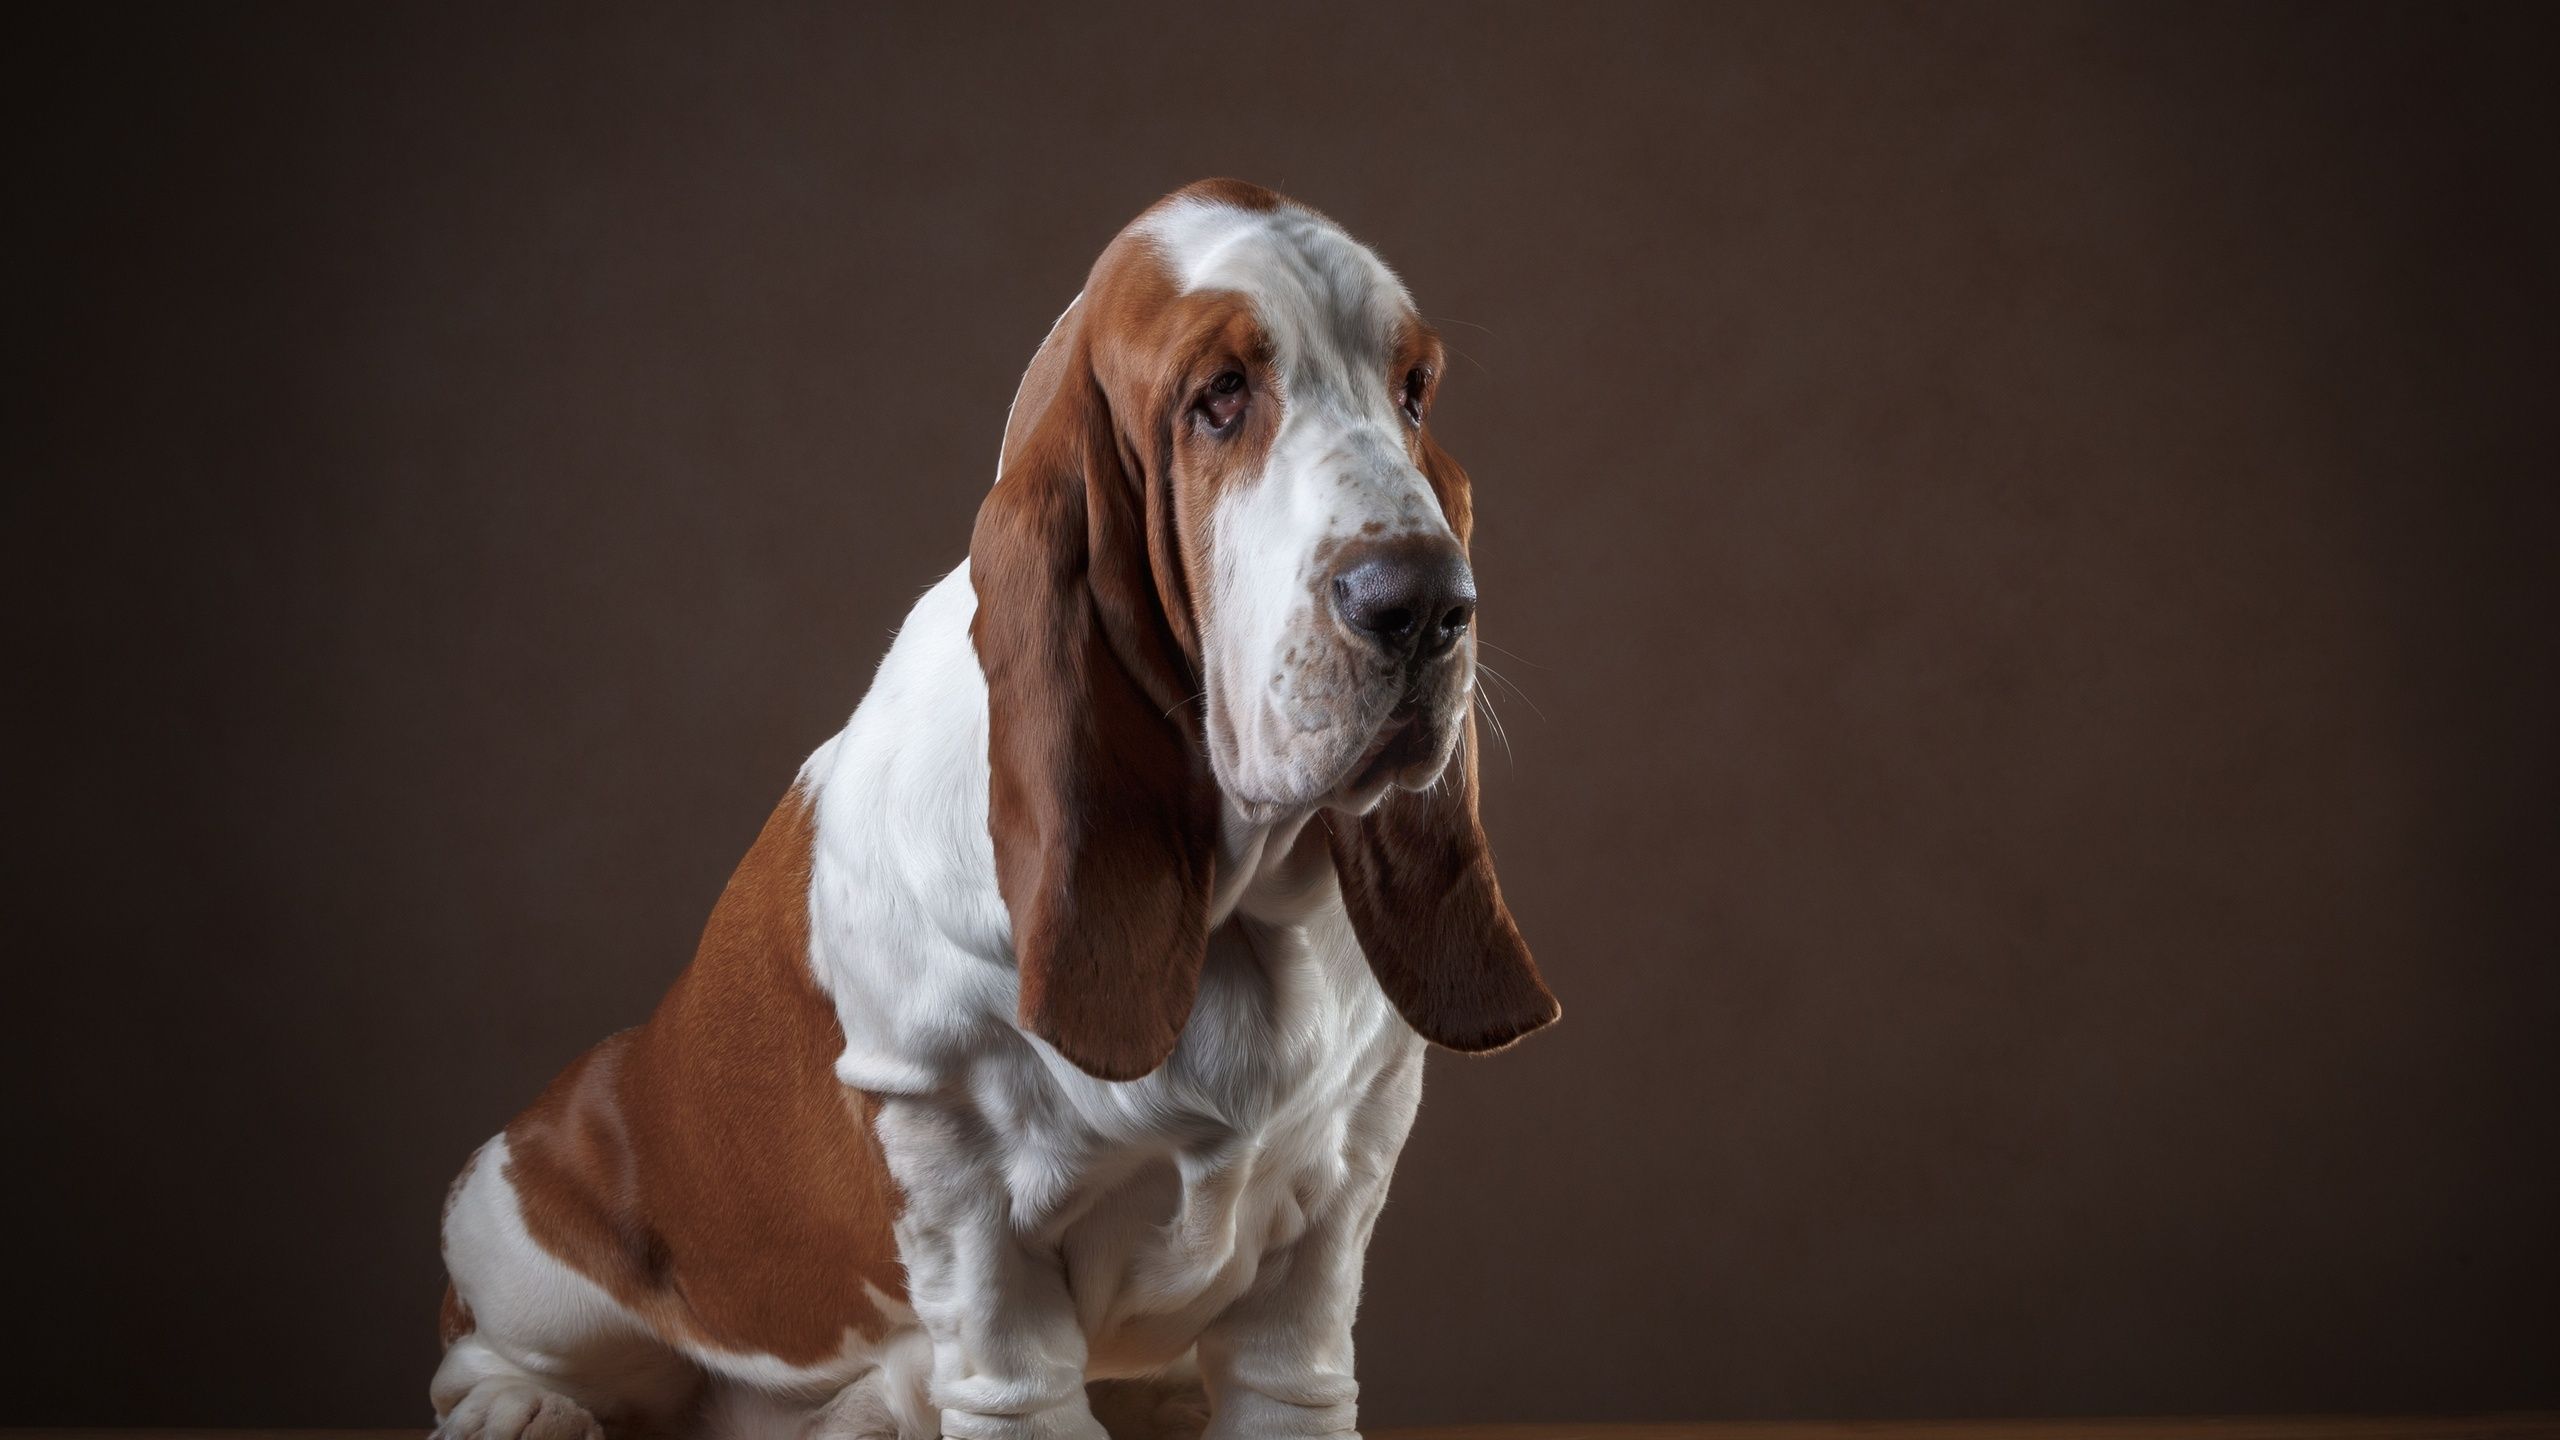 Basset Hound 1440P Resolution HD 4k Wallpaper, Image, Background, Photo and Picture